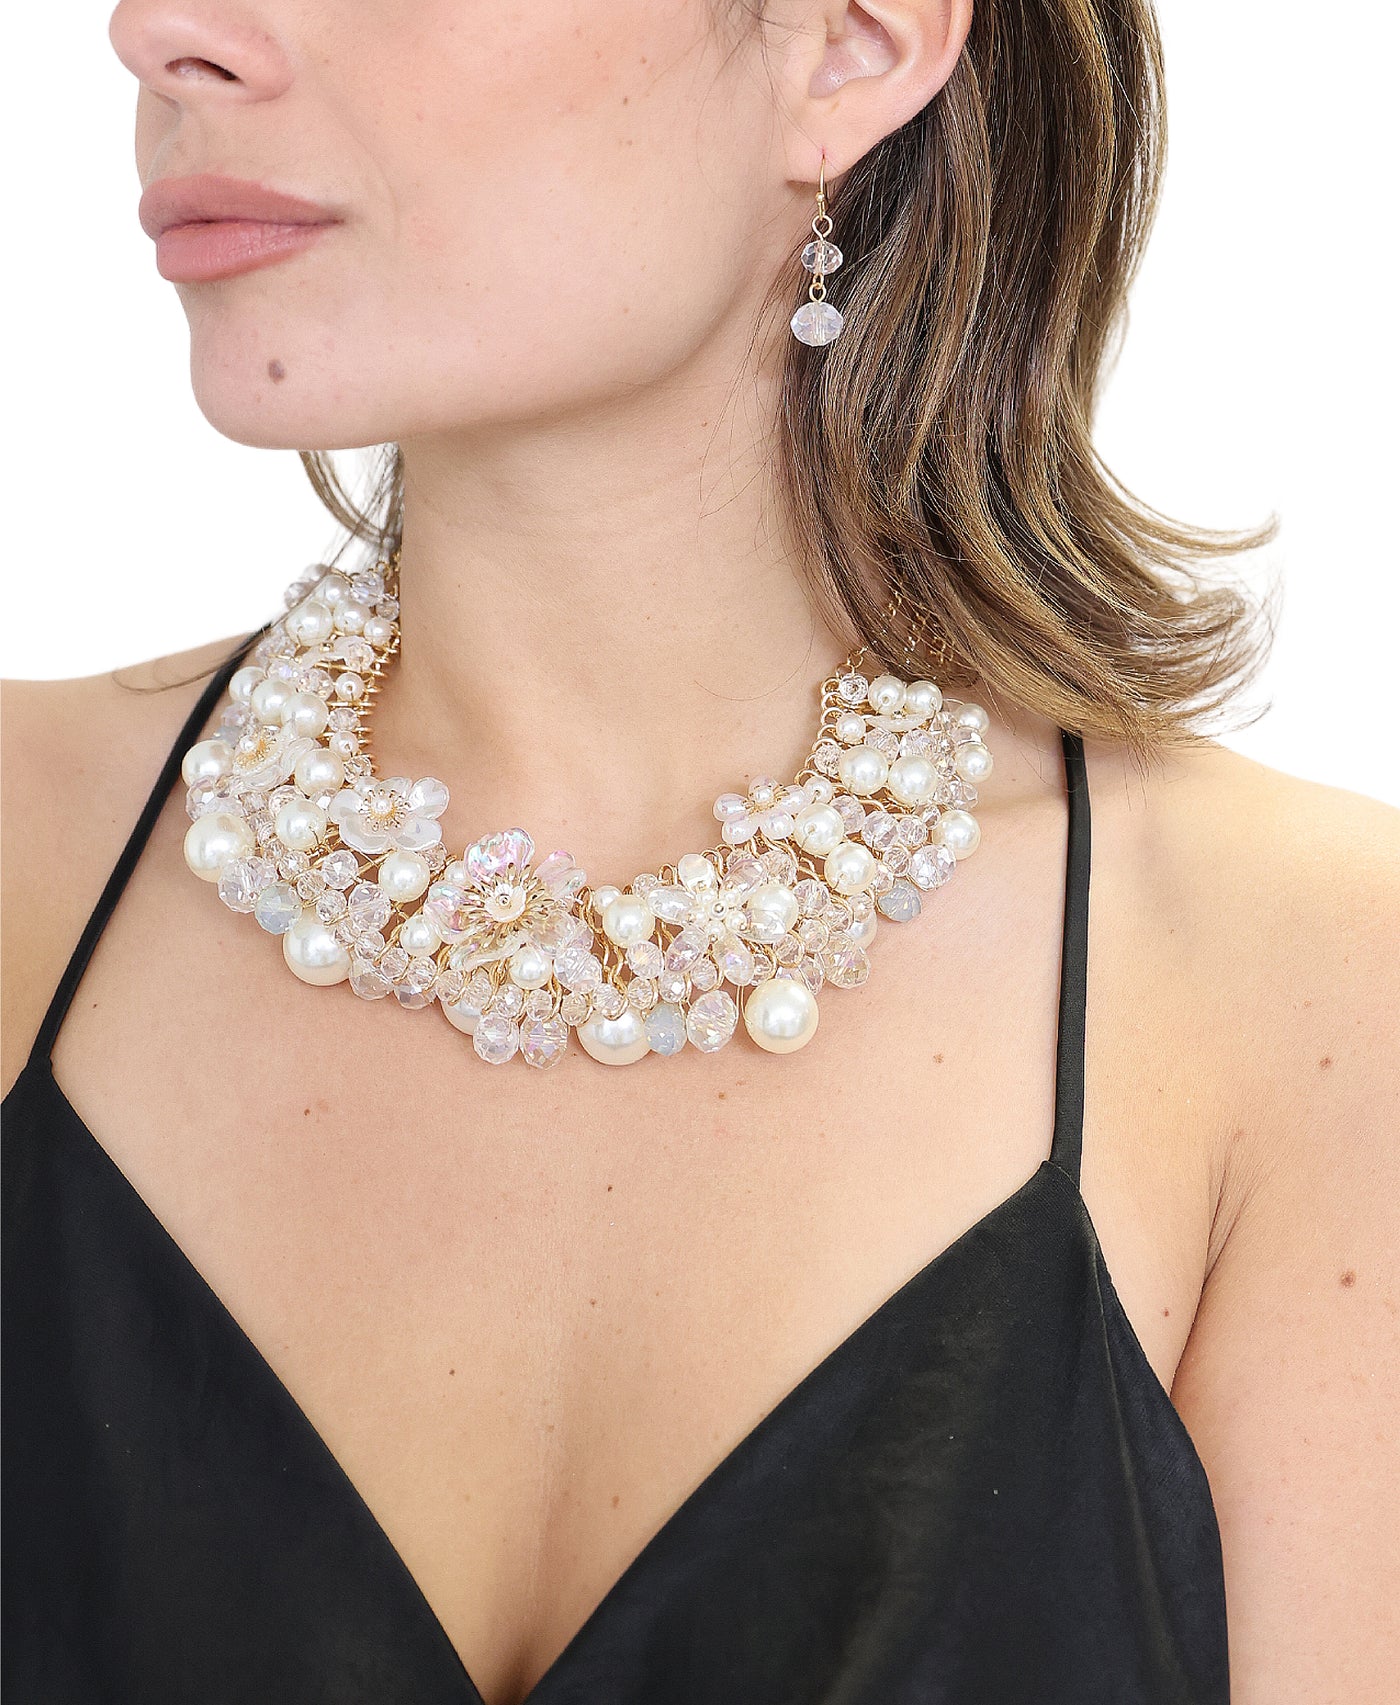 Chunky Flower & Faux Pearl Necklace & Earrings Set image 1